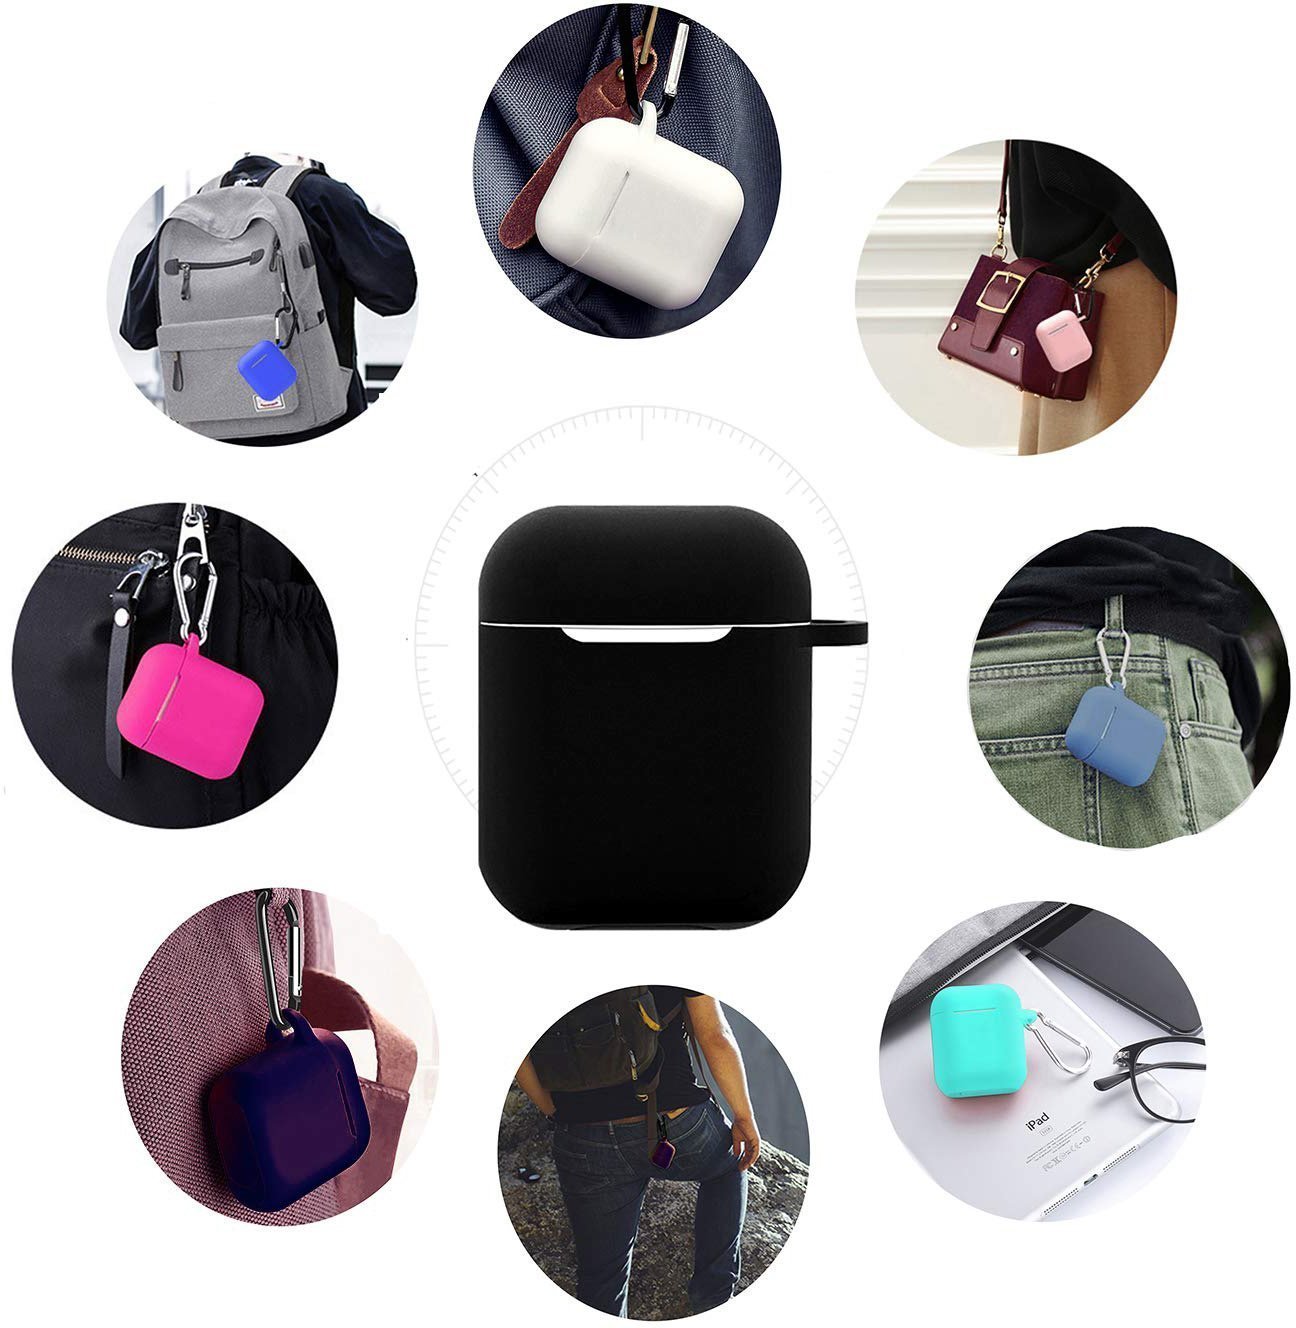 Apple Airpods Soft Silicone Case